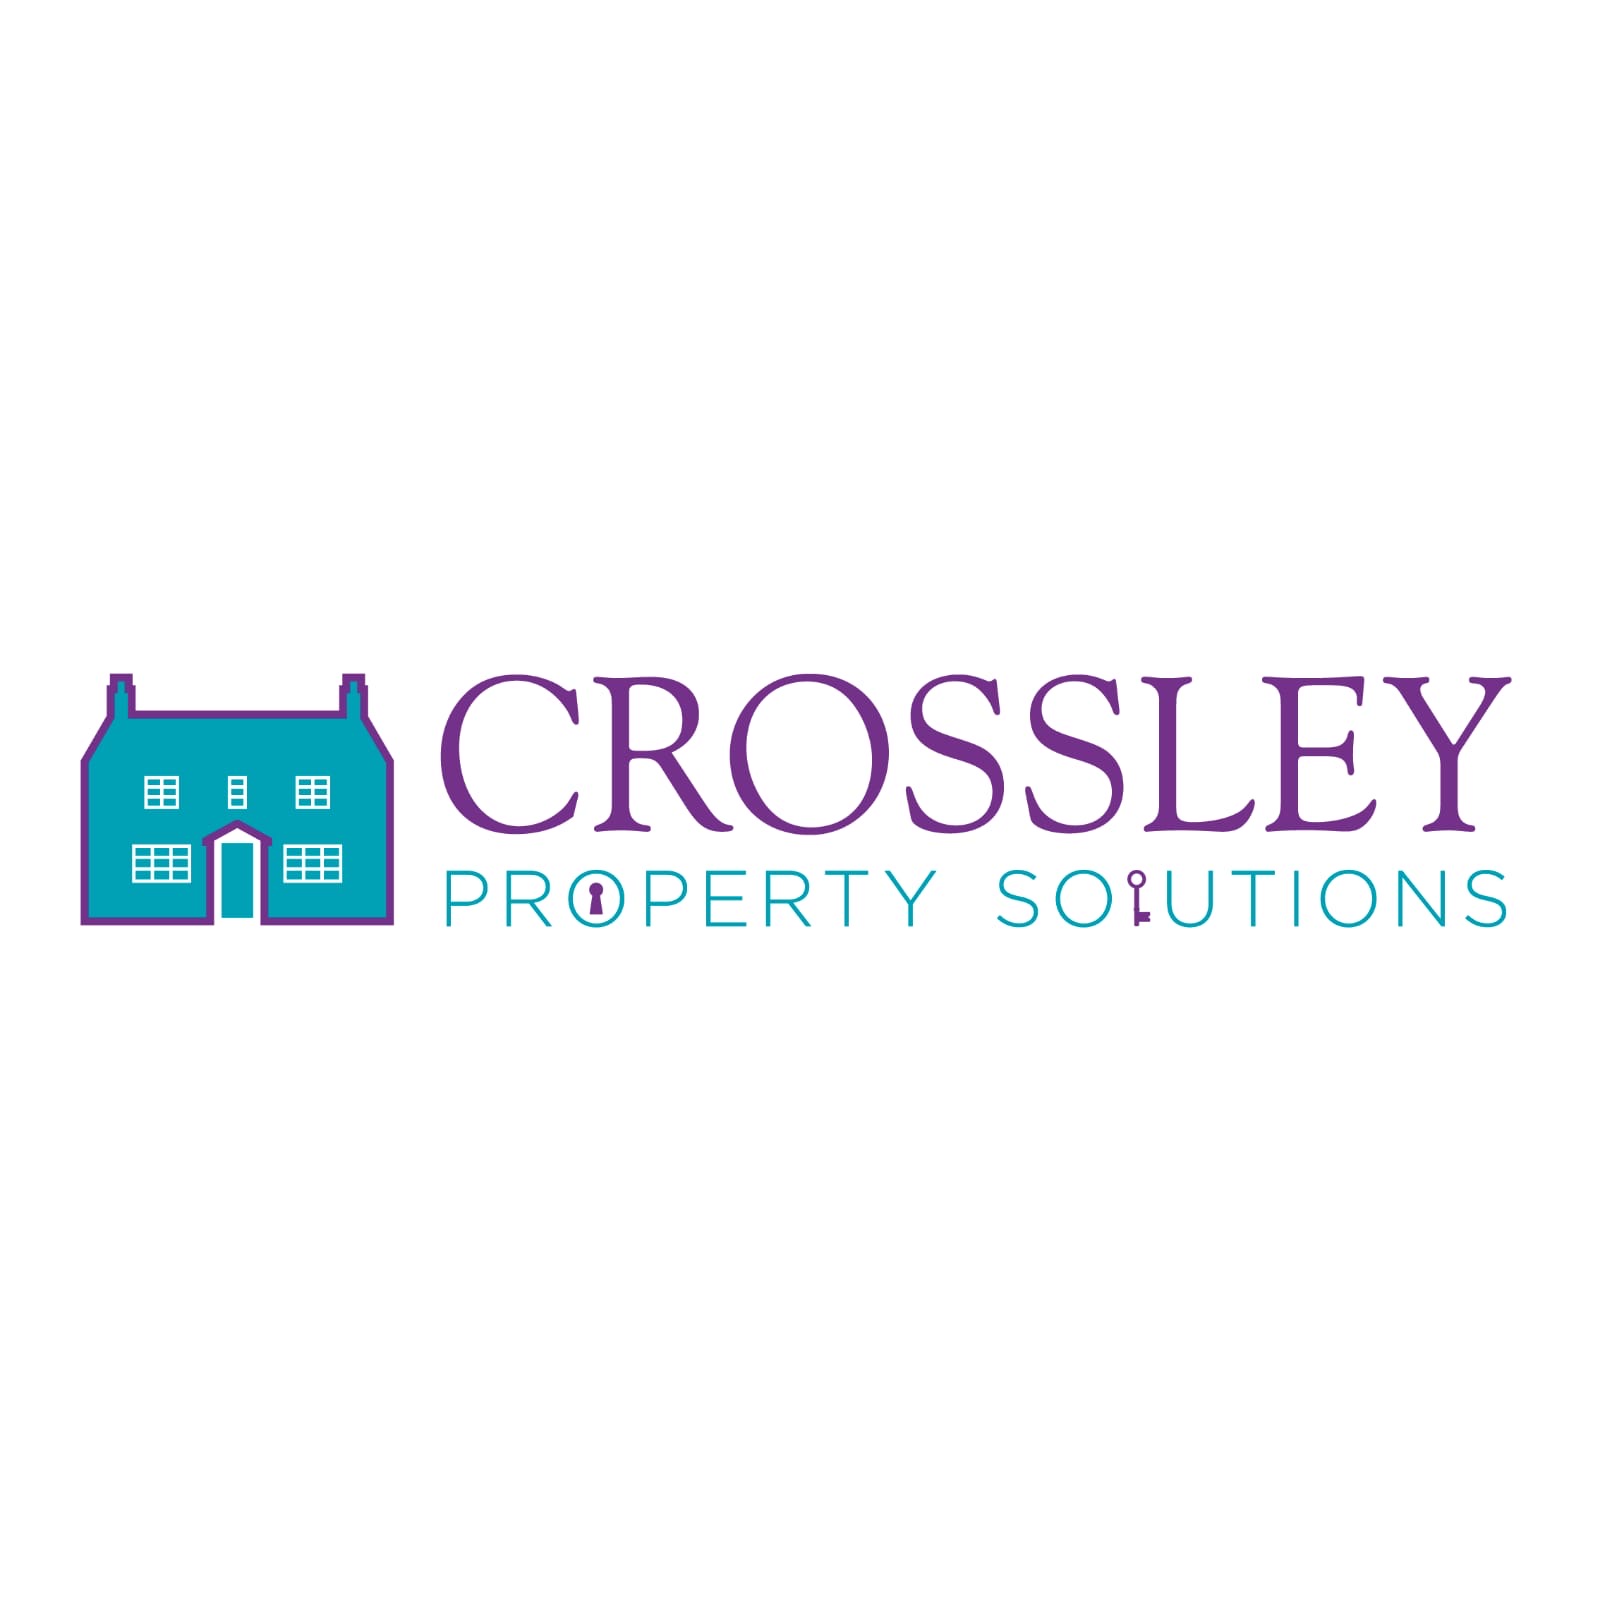 Crossley Property Solutions